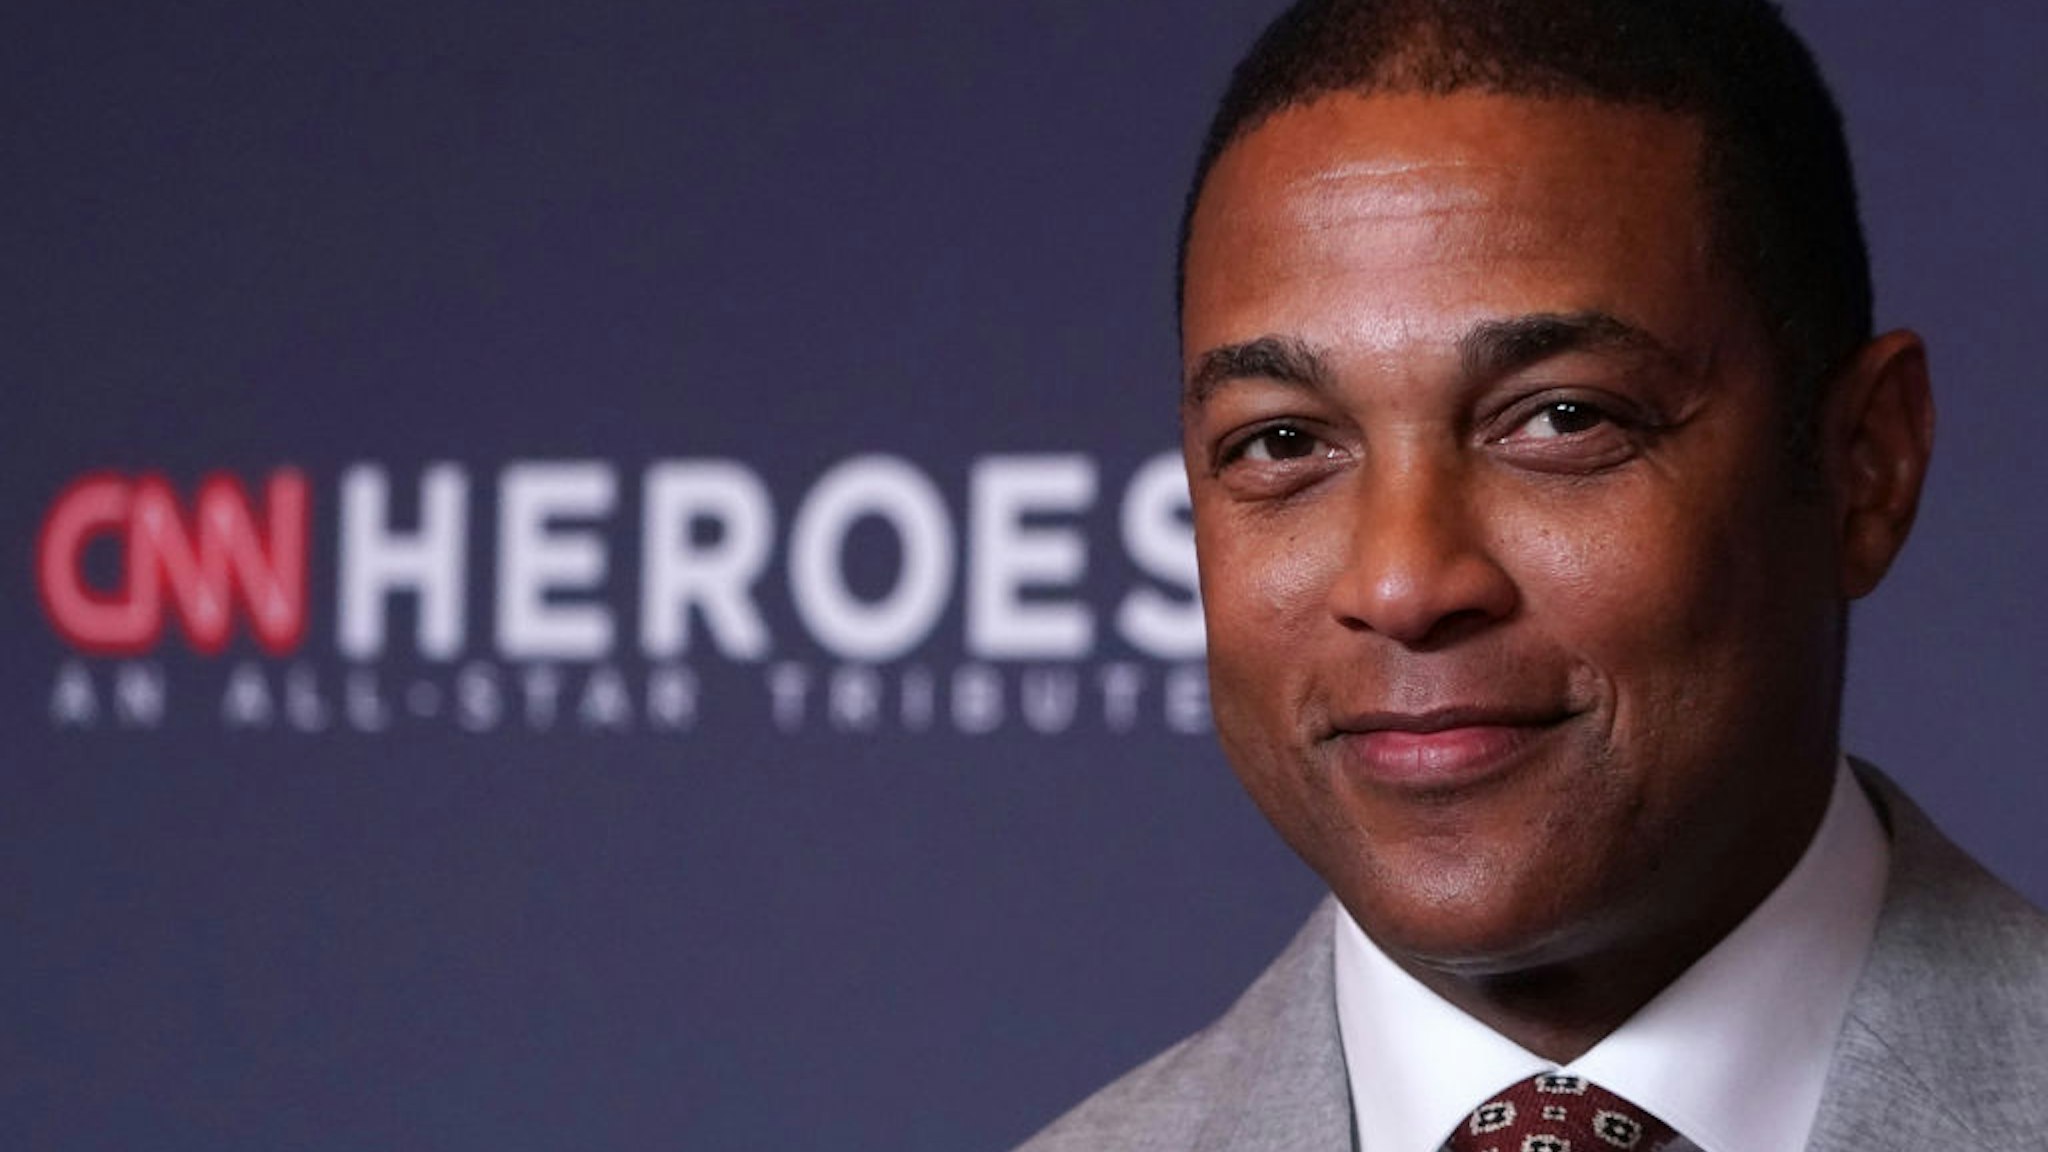 NEW YORK, NEW YORK - DECEMBER 08: Don Lemon attends the 13th Annual CNN Heroes at the American Museum of Natural History on December 08, 2019 in New York City. (Photo by J. Countess/Getty Images)